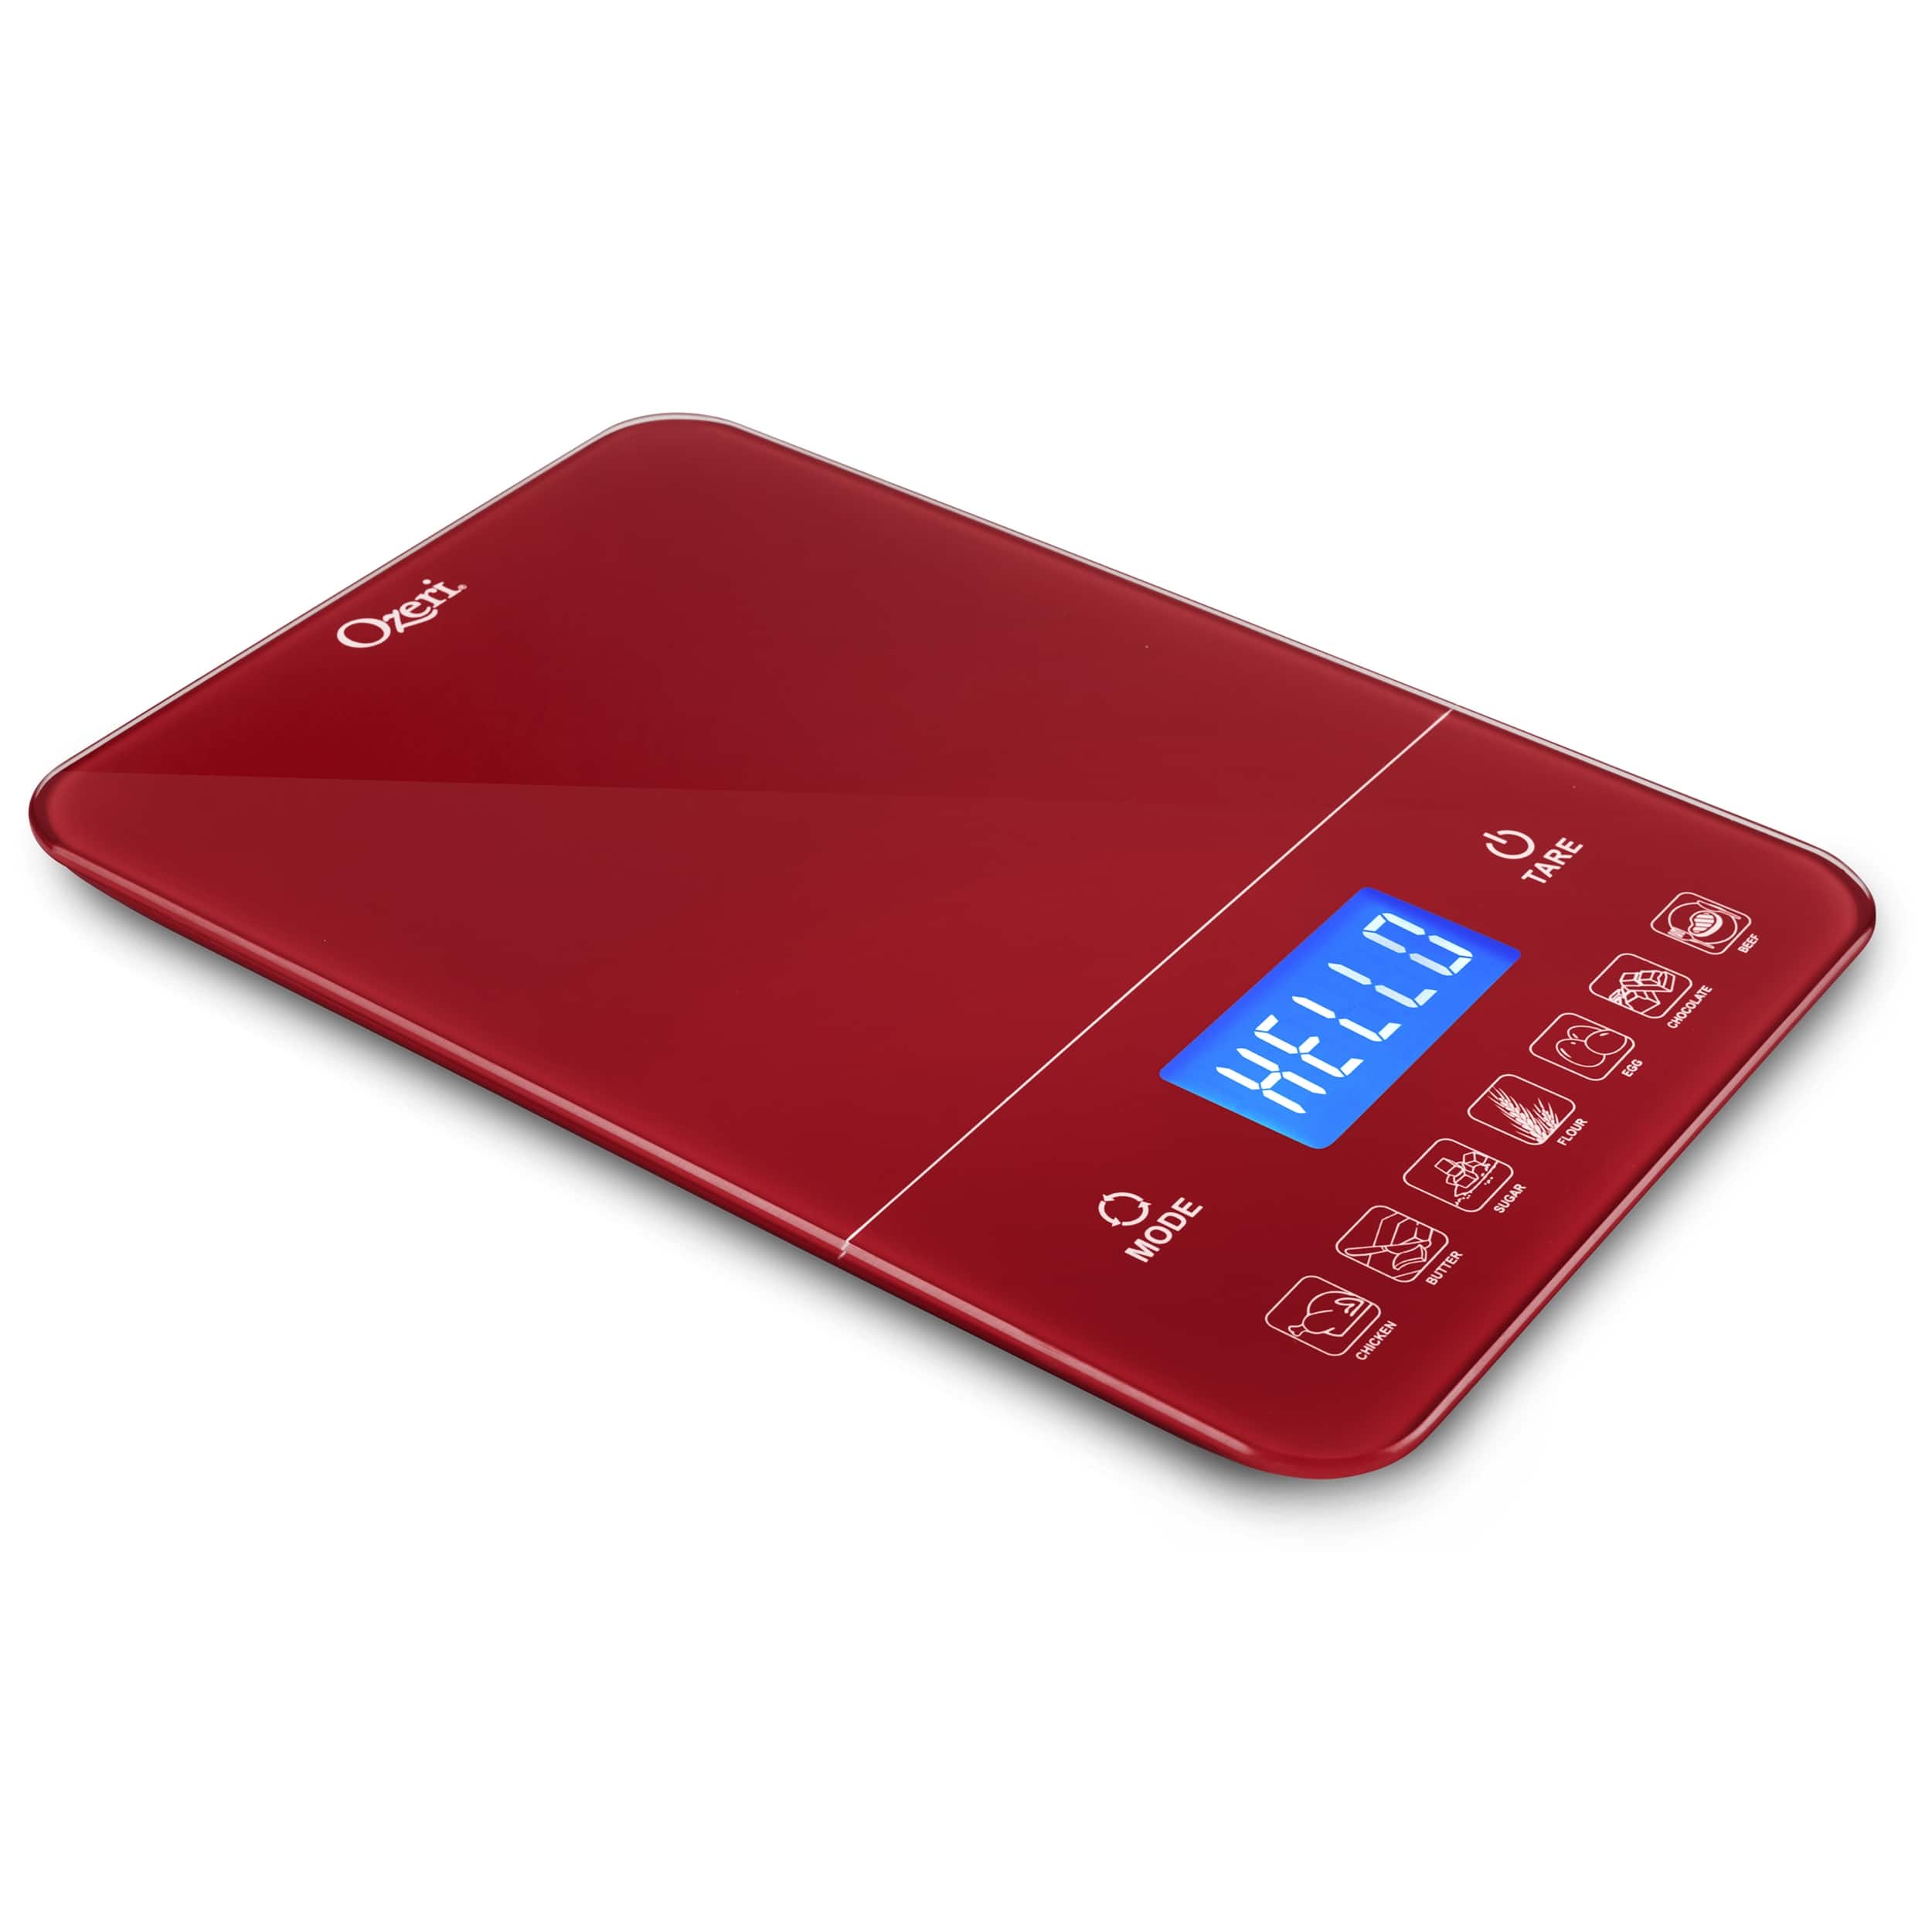 Insten Digital Food Kitchen Scale In Grams & Ounces - 1g/0.1oz Precise Upto  11lb (5000g) Capacity, Silver : Target